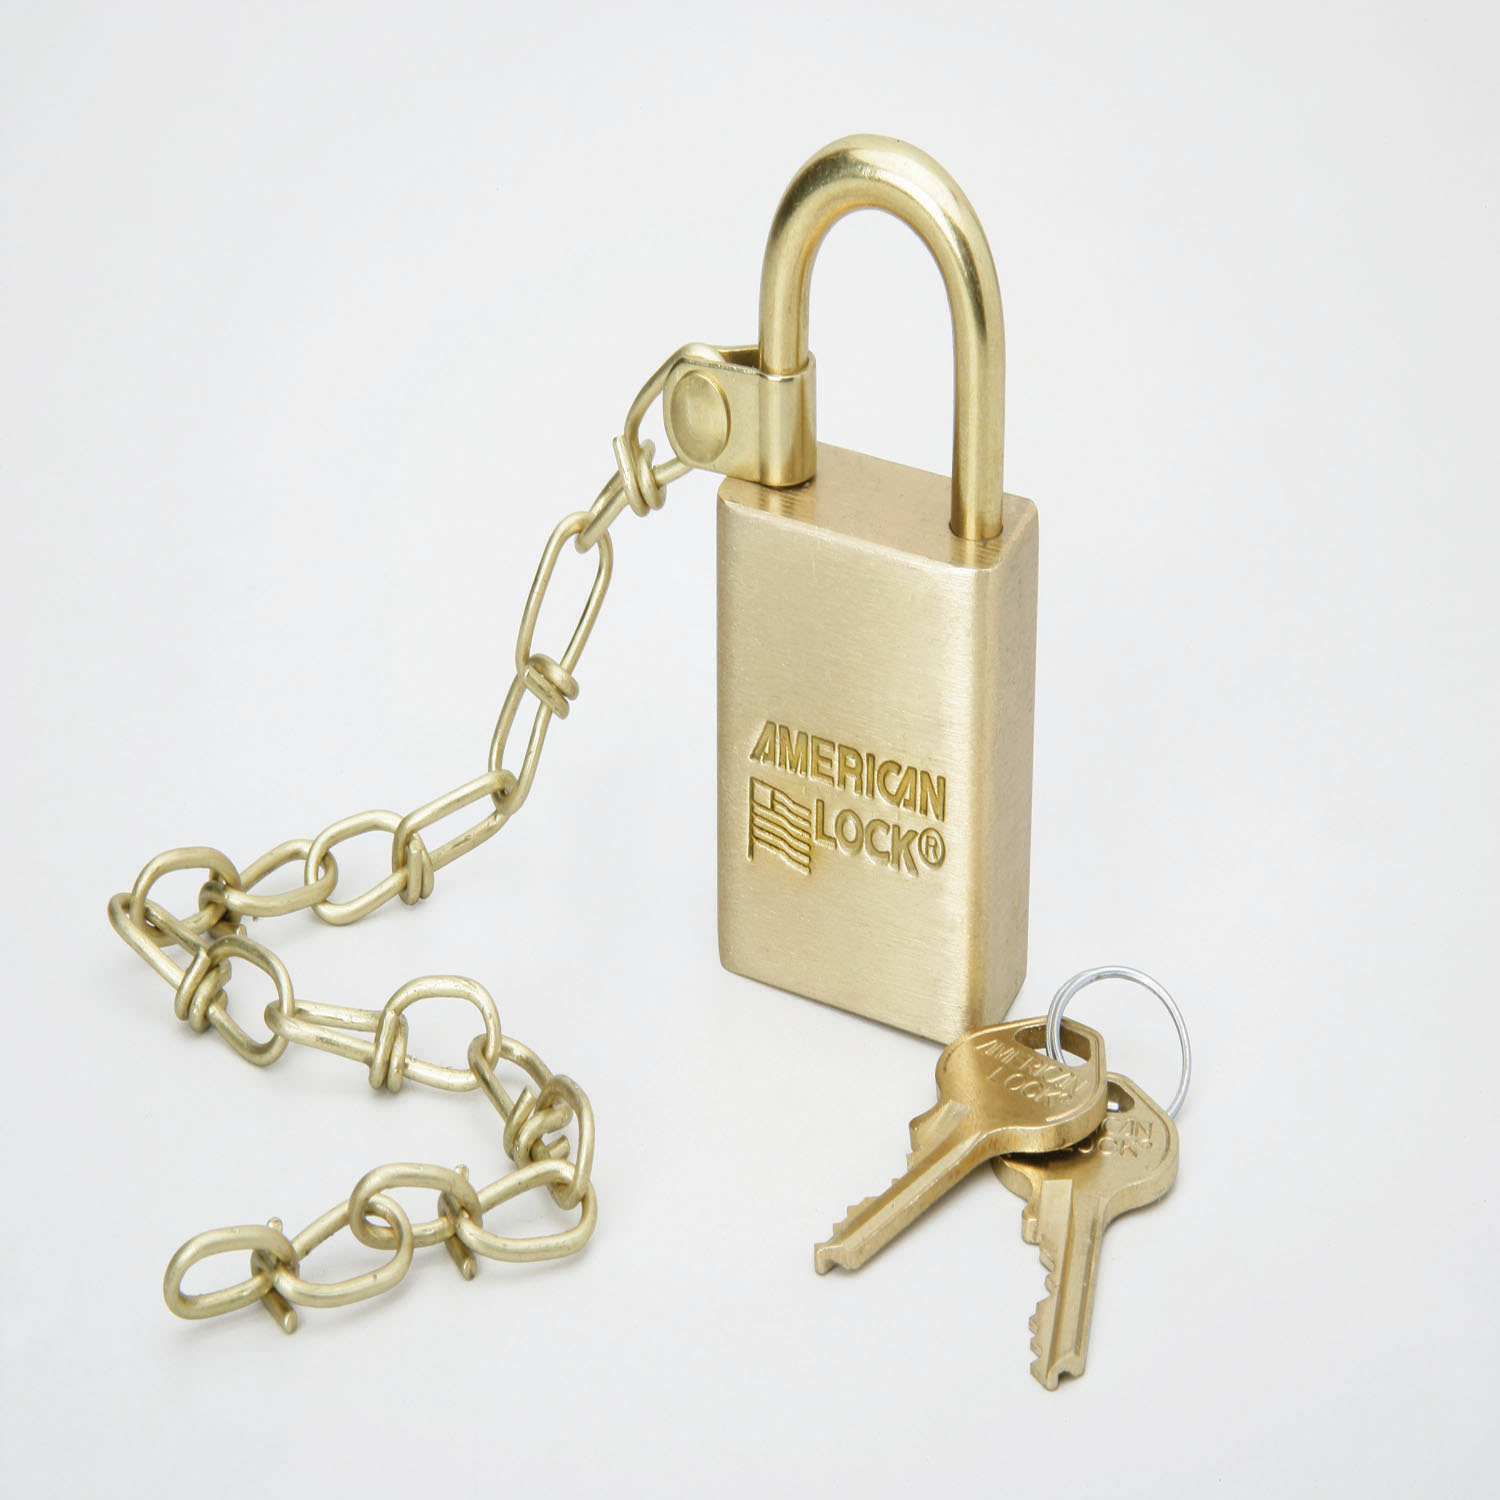 Padlock Set, Solid Case, 1.5" Wide Brass, Grand Master Keyed, w/Chain, 30/SE, 15-10-5 Groupings